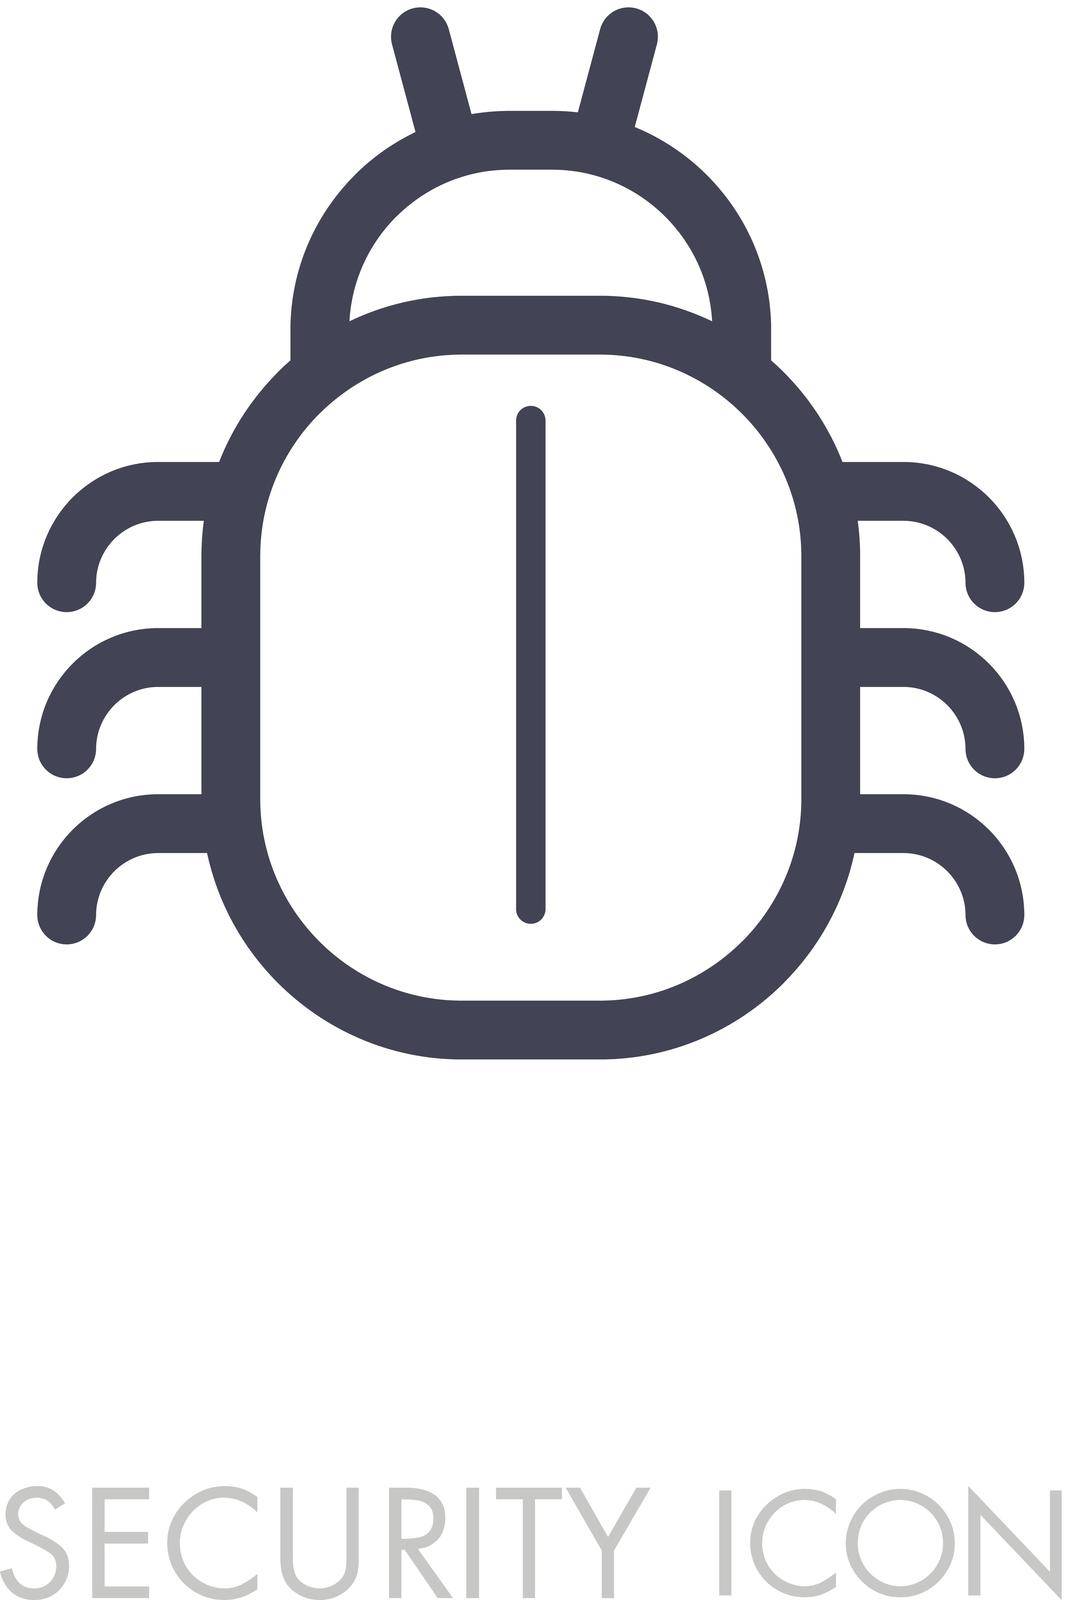 Software or program bug icon by nosik